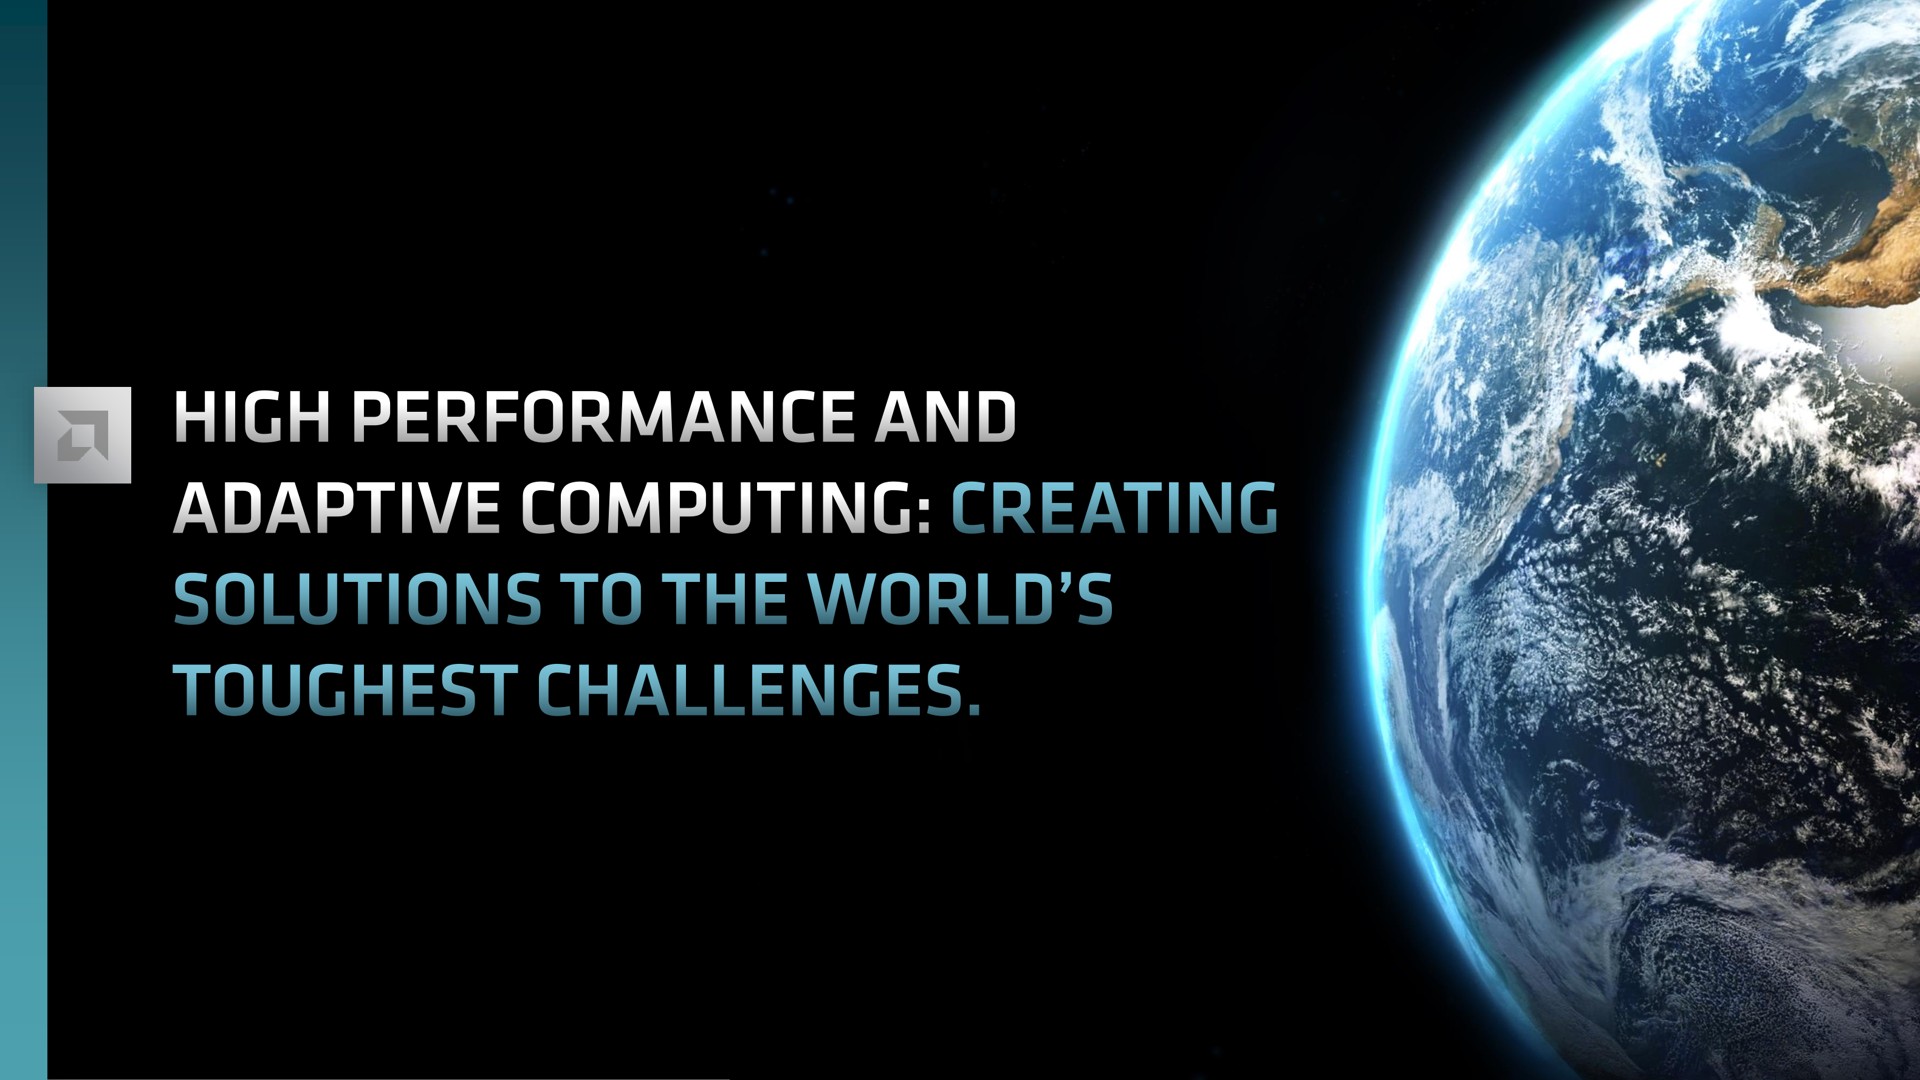 high performance and adaptive computing creating solutions to the world challenges | AMD